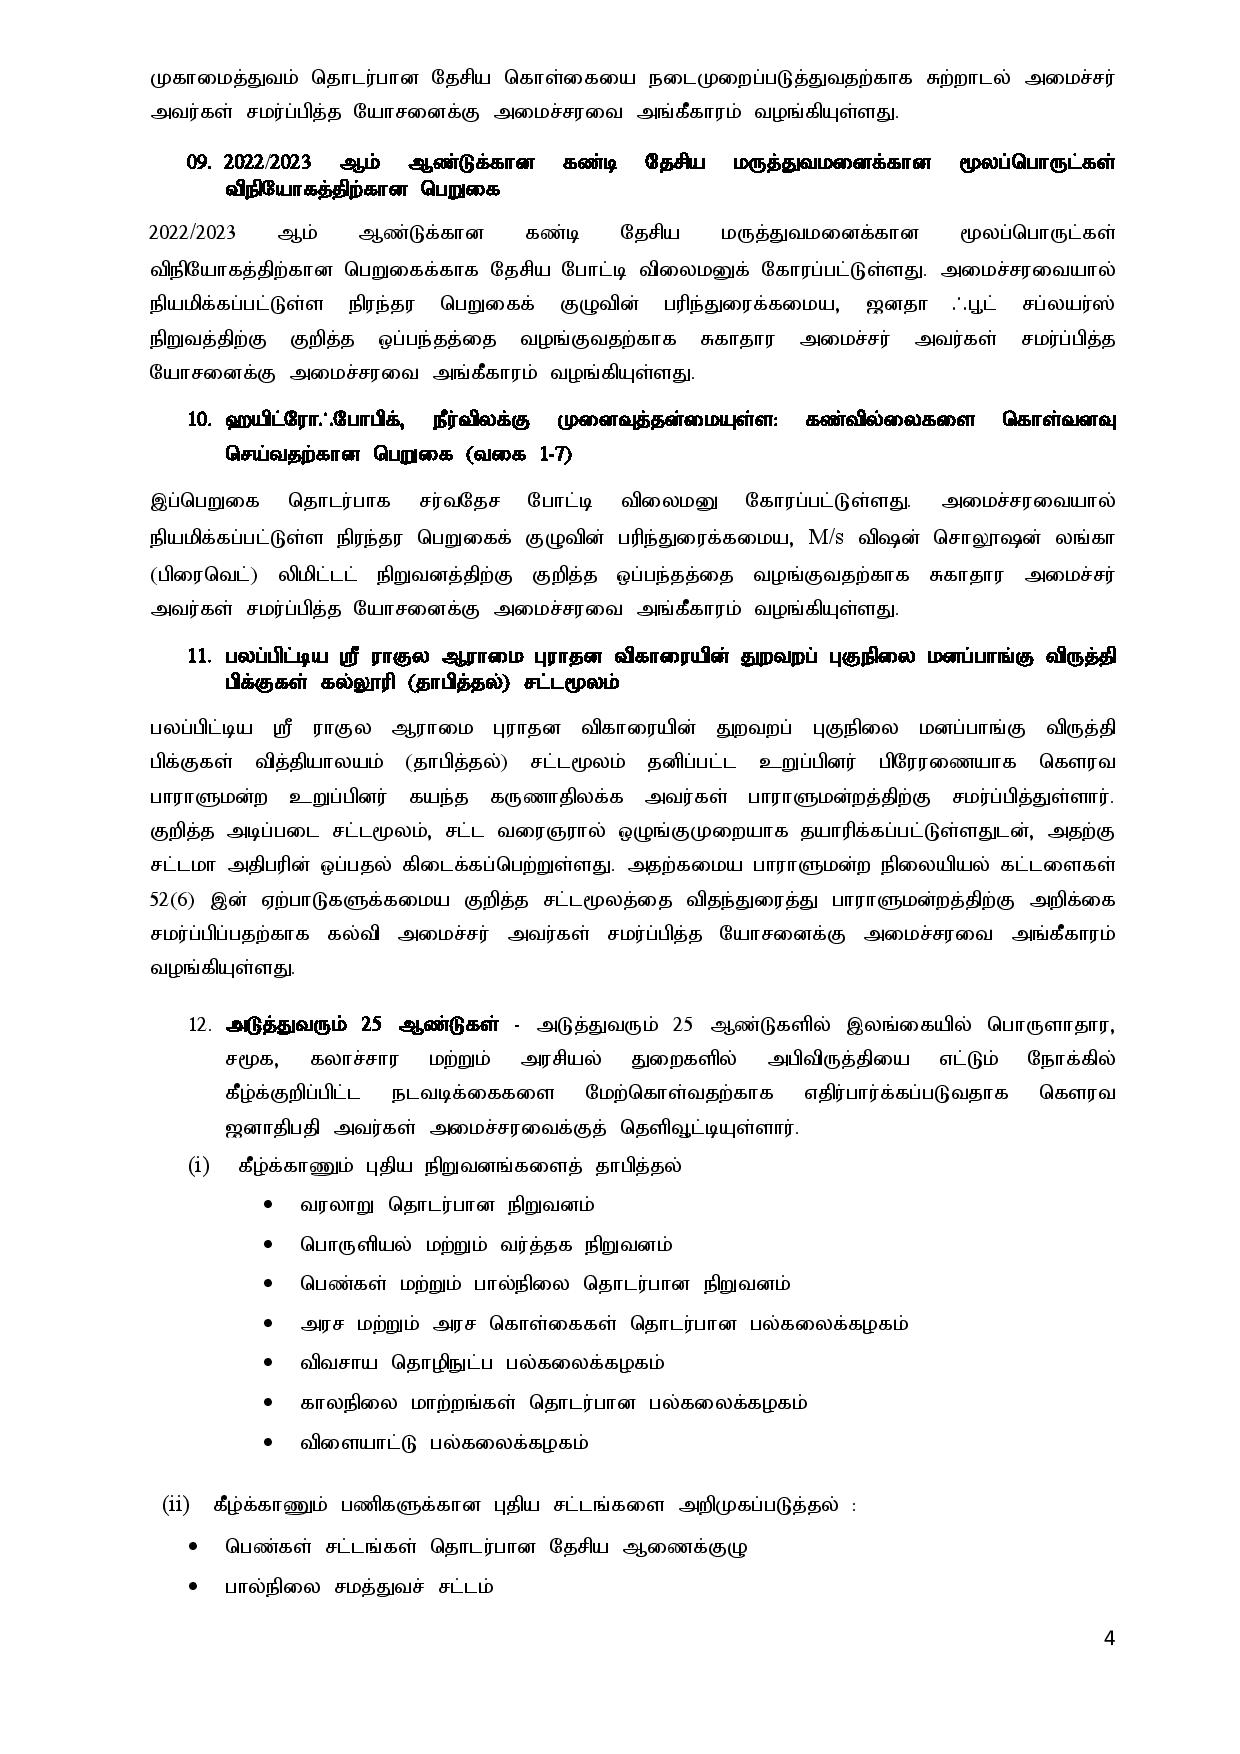 Cabinet Decisions on 09.01.2023 Tamil page 004 1